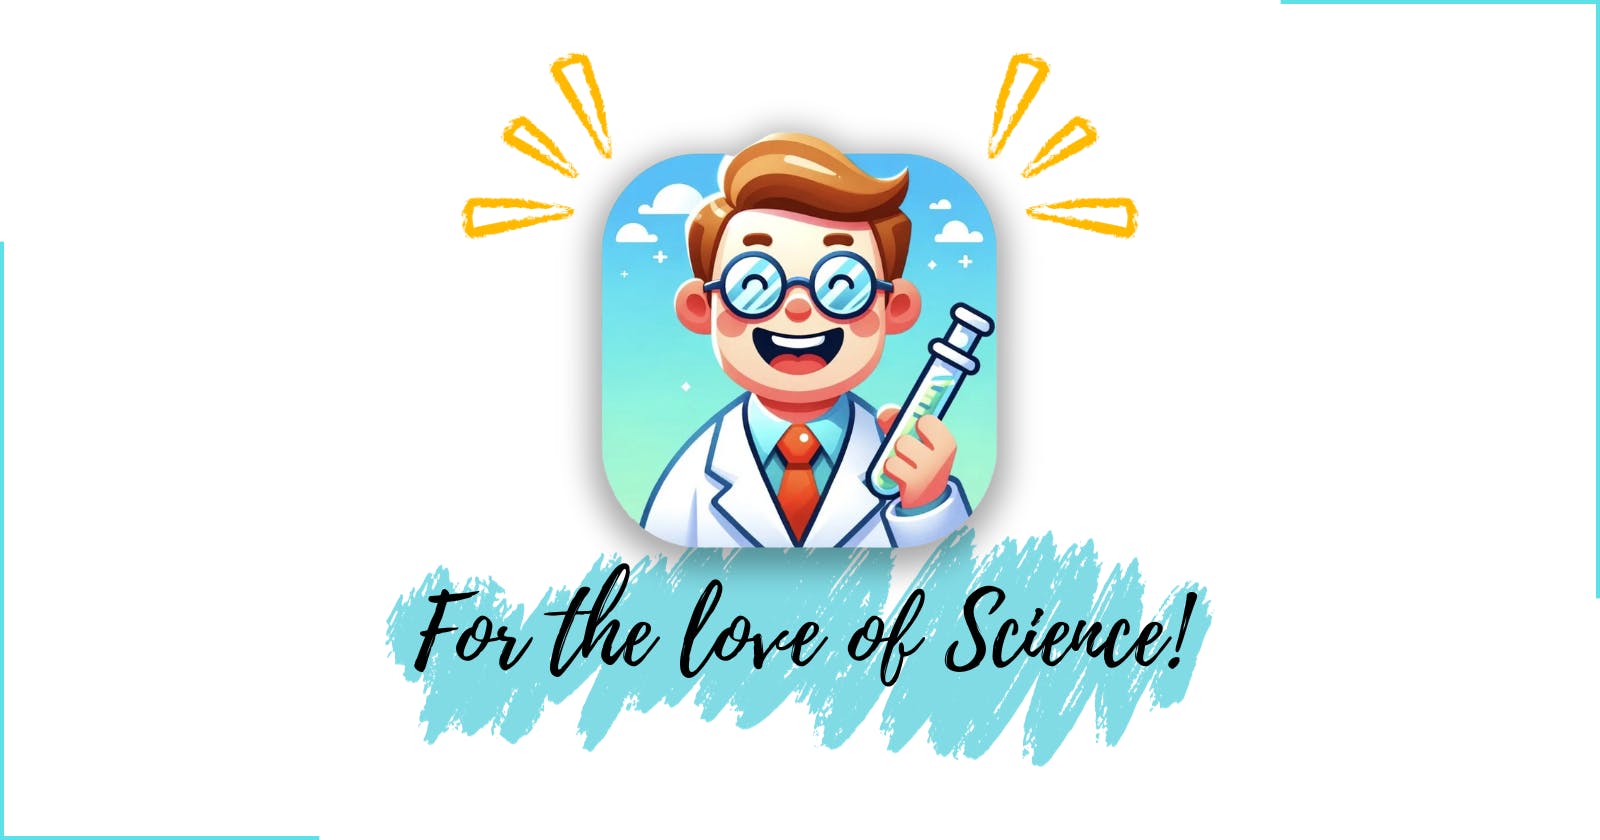 Introducing AmateurScientists.in: a social platform with creator incentives redesigned!